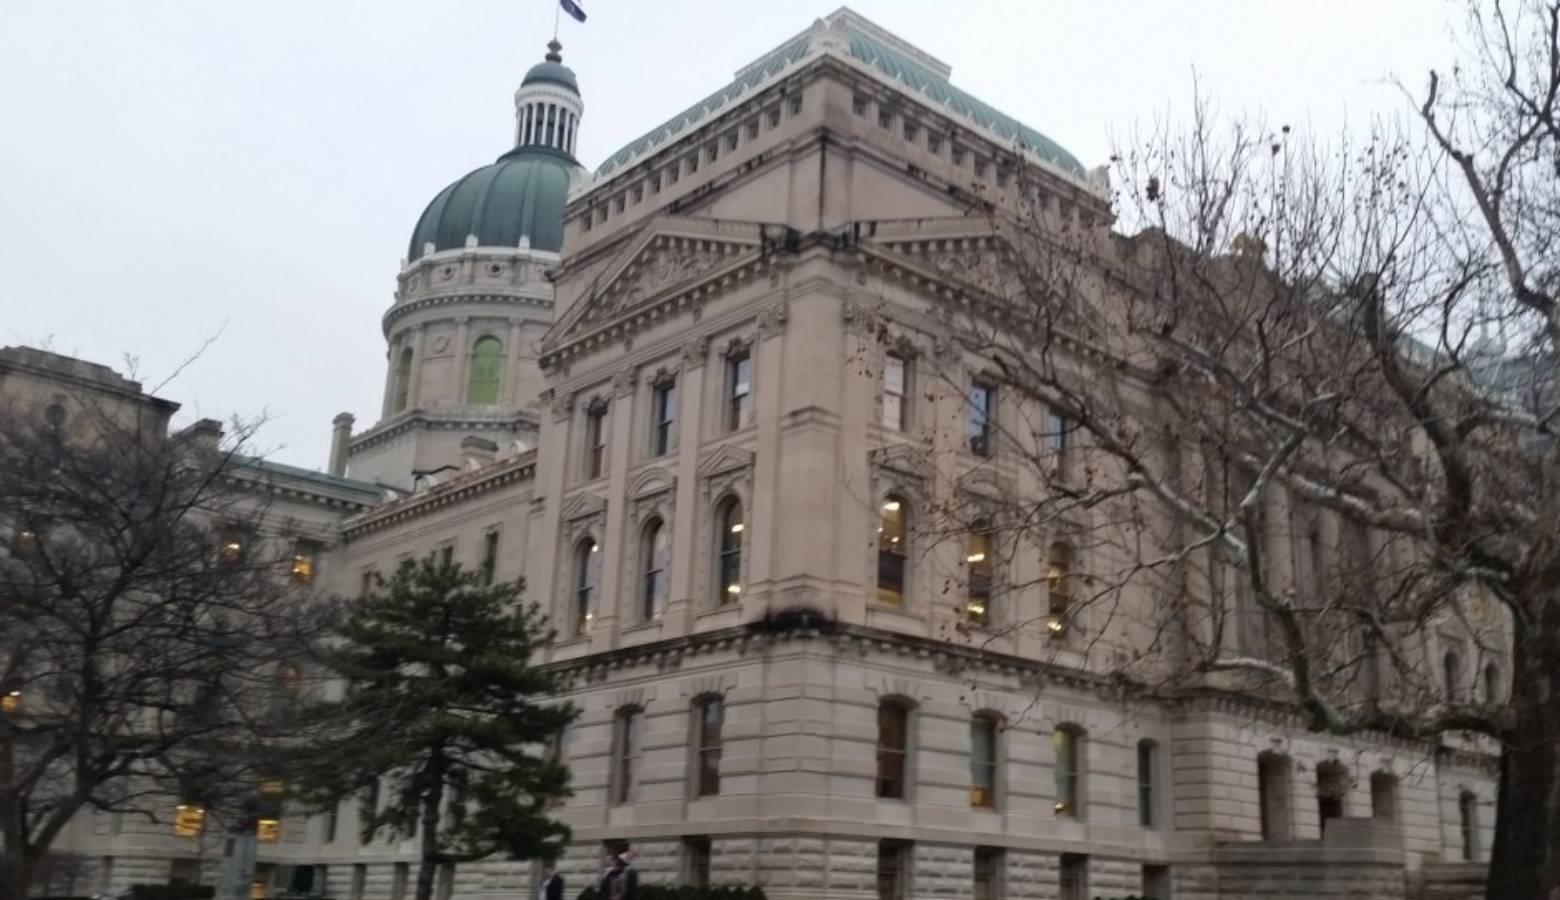 Indiana began the final quarter of its 2019 fiscal year with a positive month of revenue collections. (Lauren Chapman/IPB News)